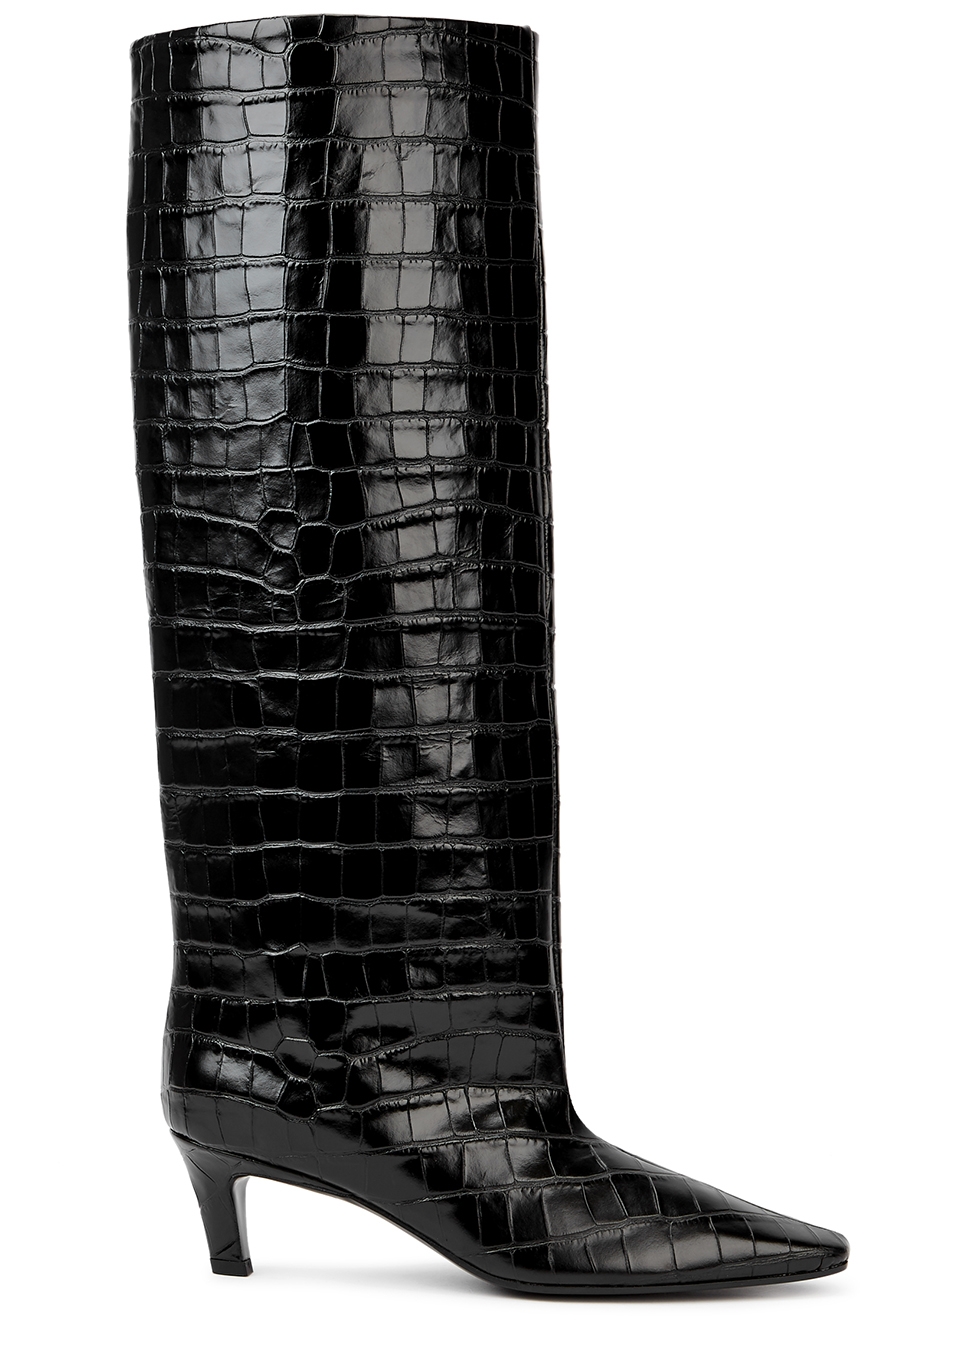 The Wide Shaft black leather knee-high boots